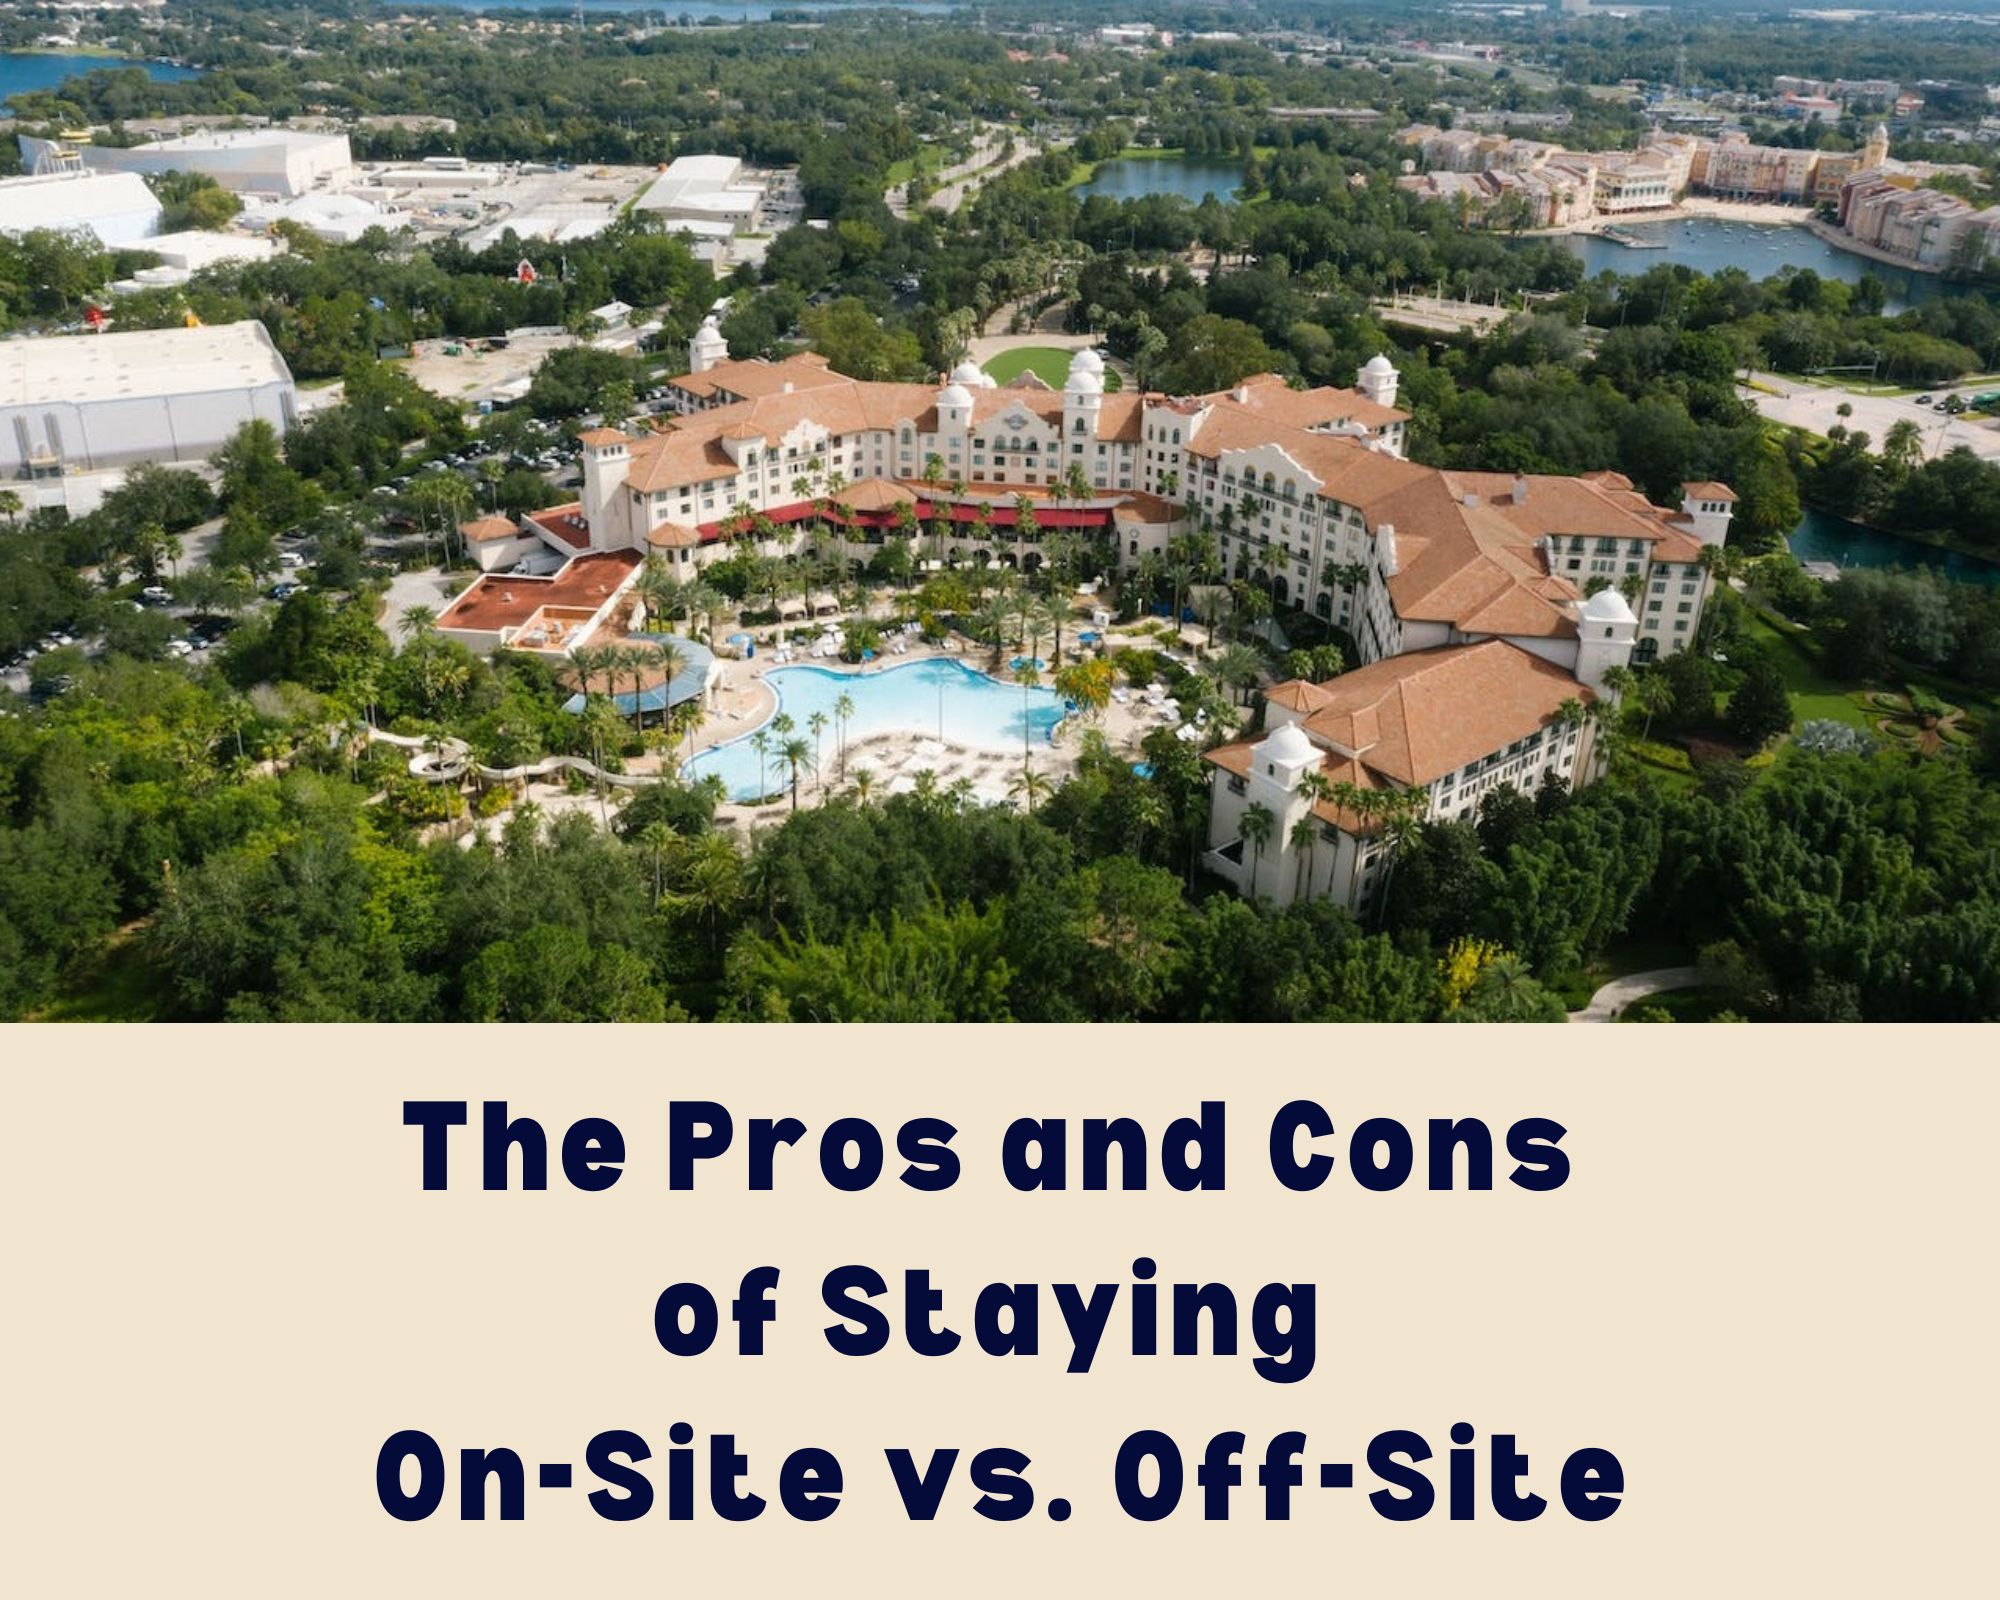 The Pros and Cons of Staying On-Site vs. Off-Site